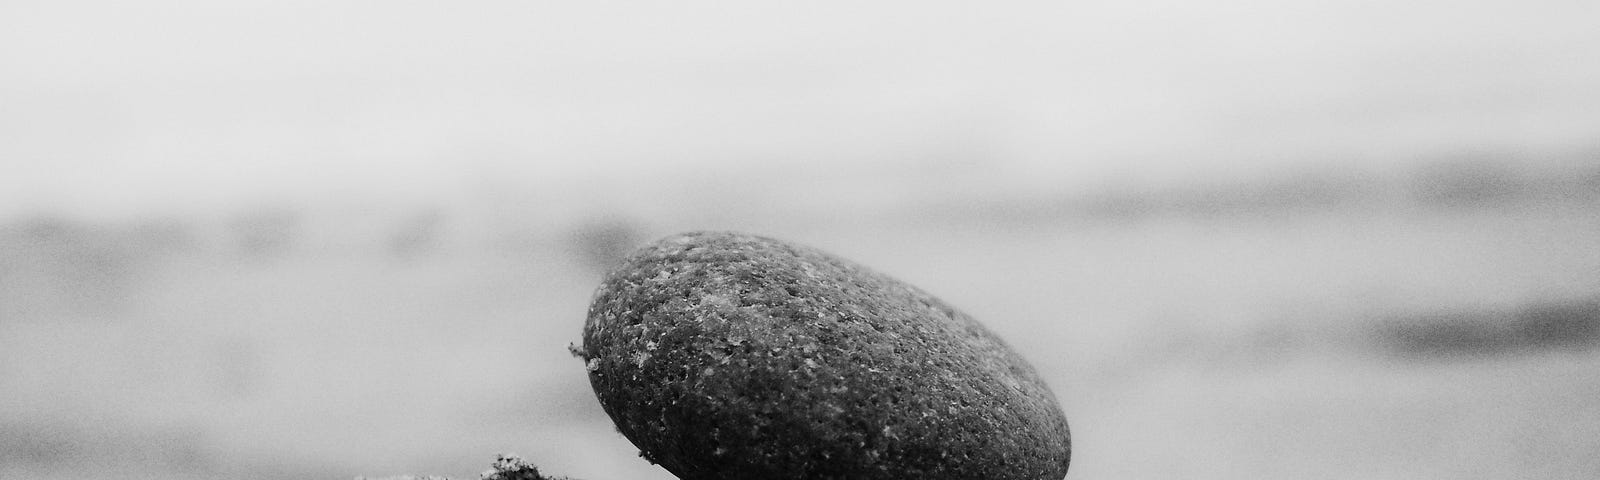 Gray image of a rock on sand.